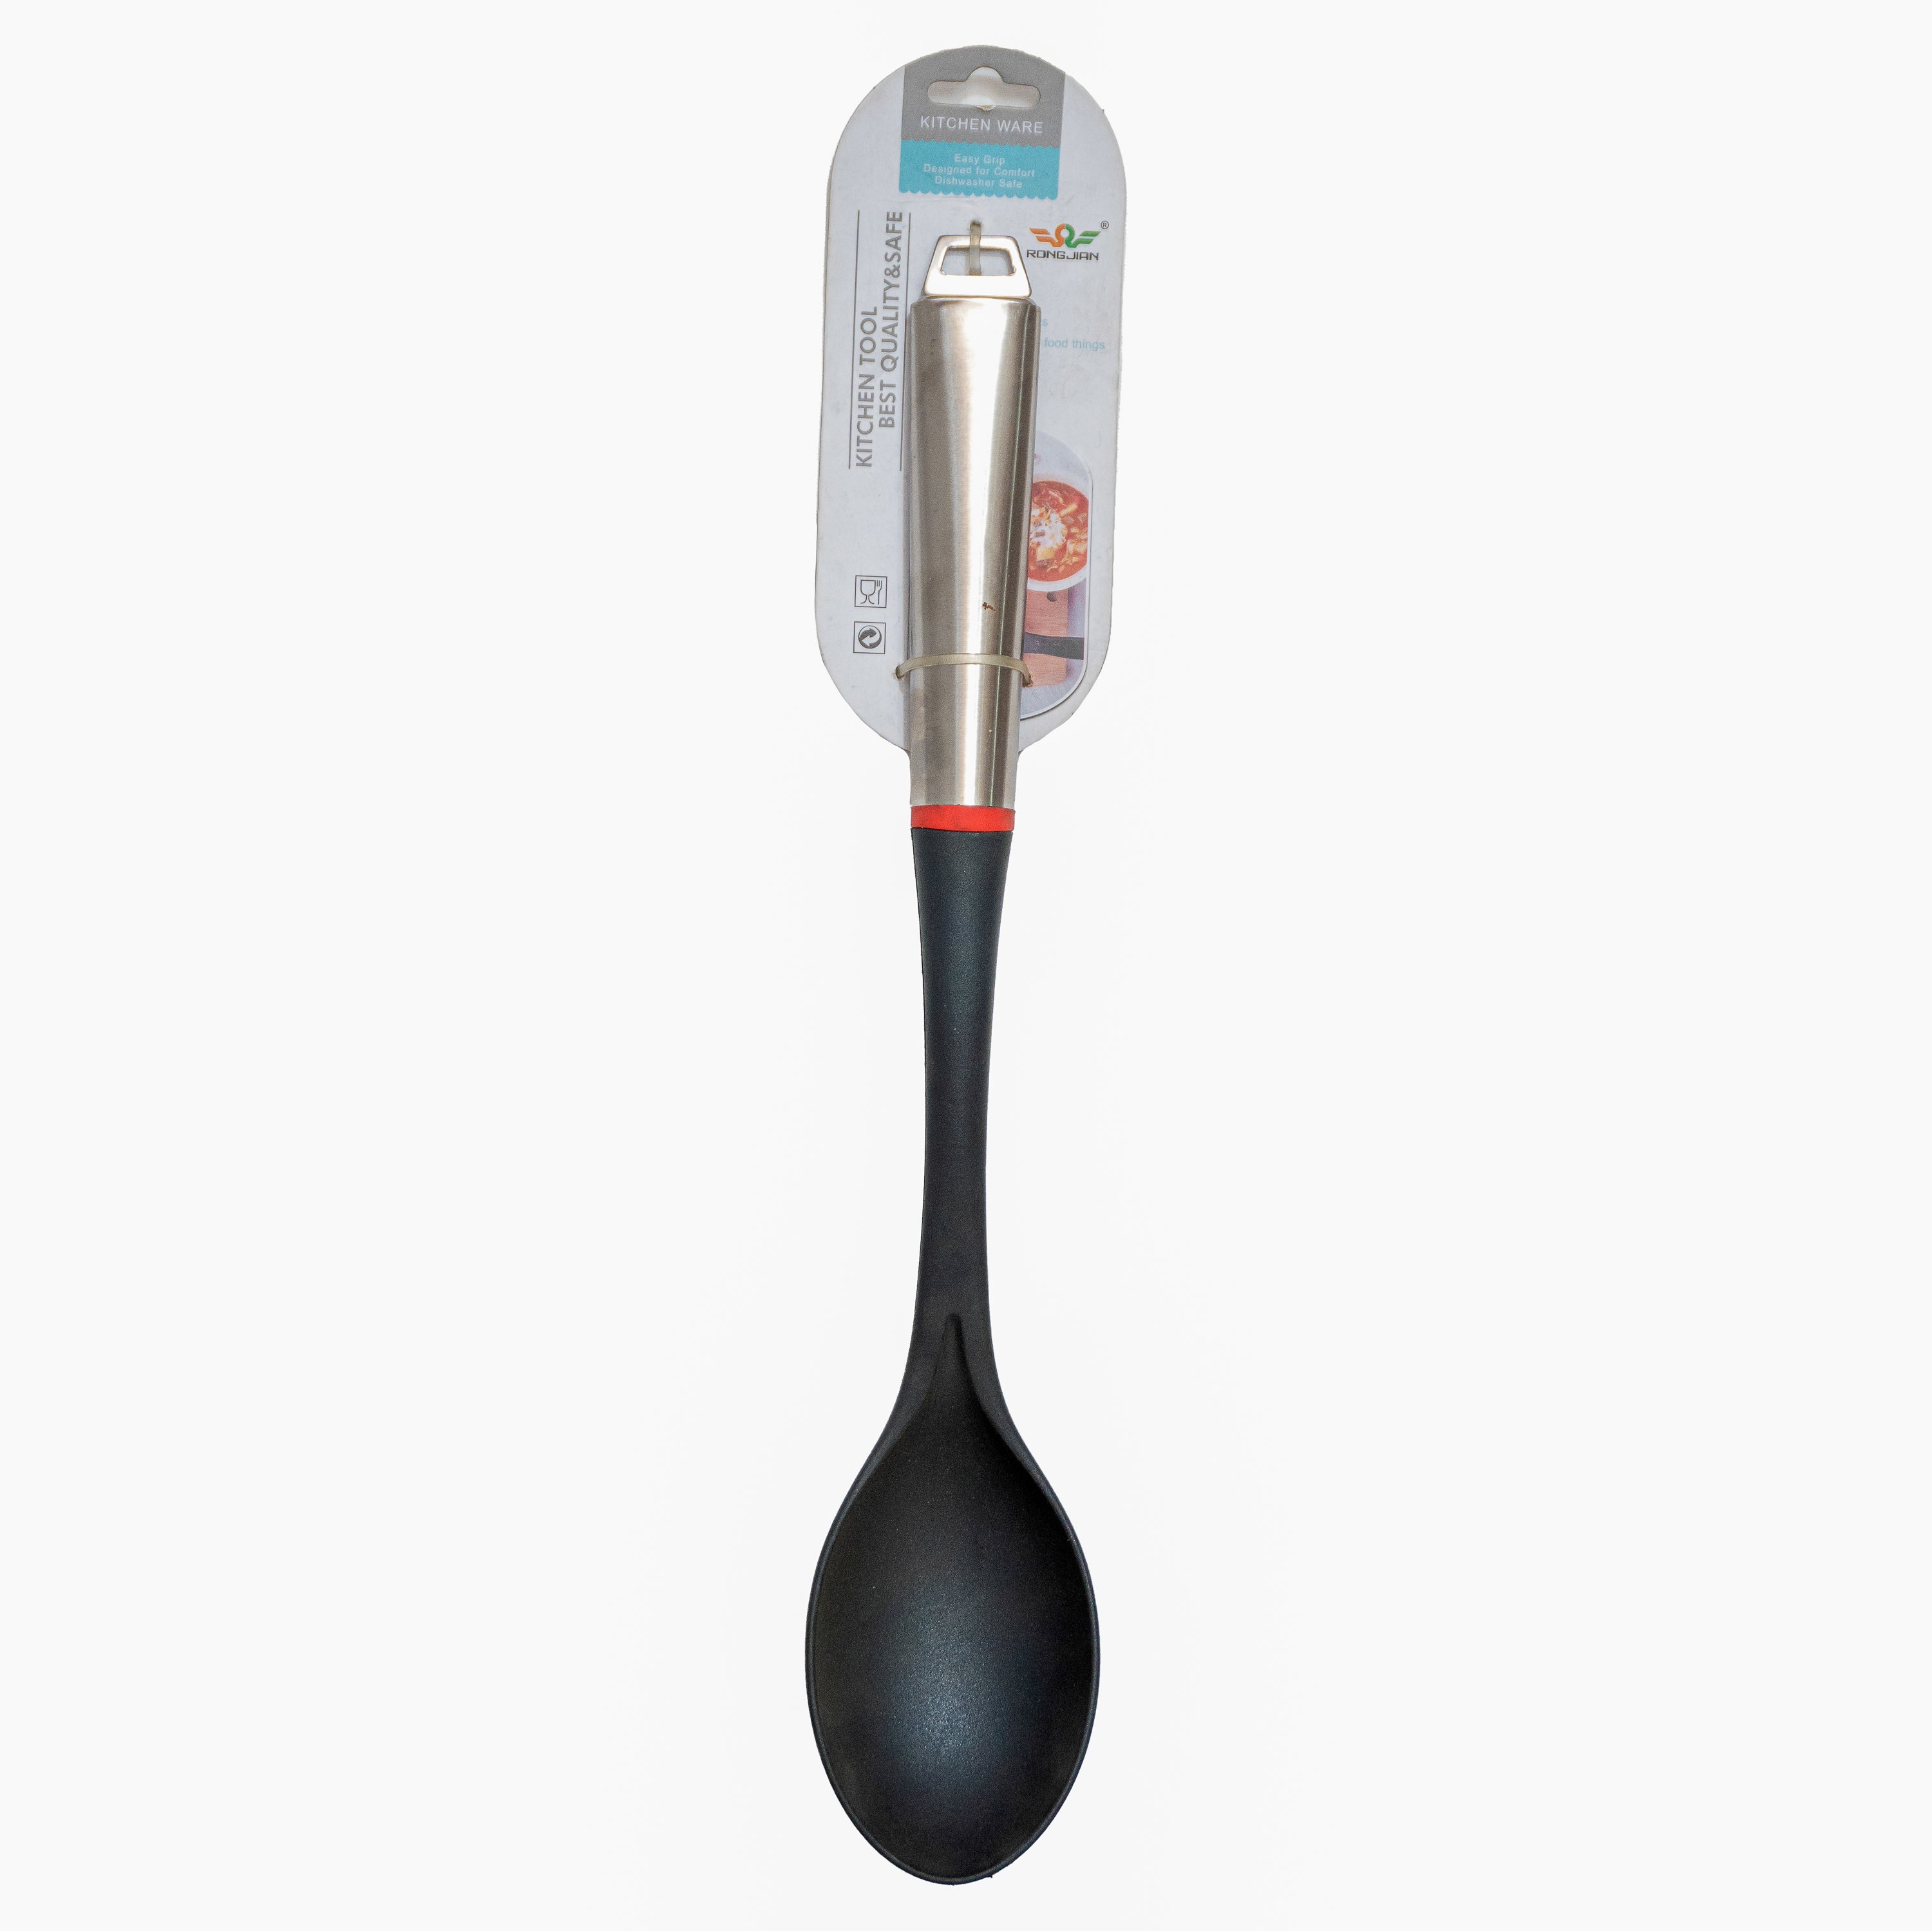 Rongjian Heat-Resistant Black Curry Spoon: Perfect Blend of Style and Functionality